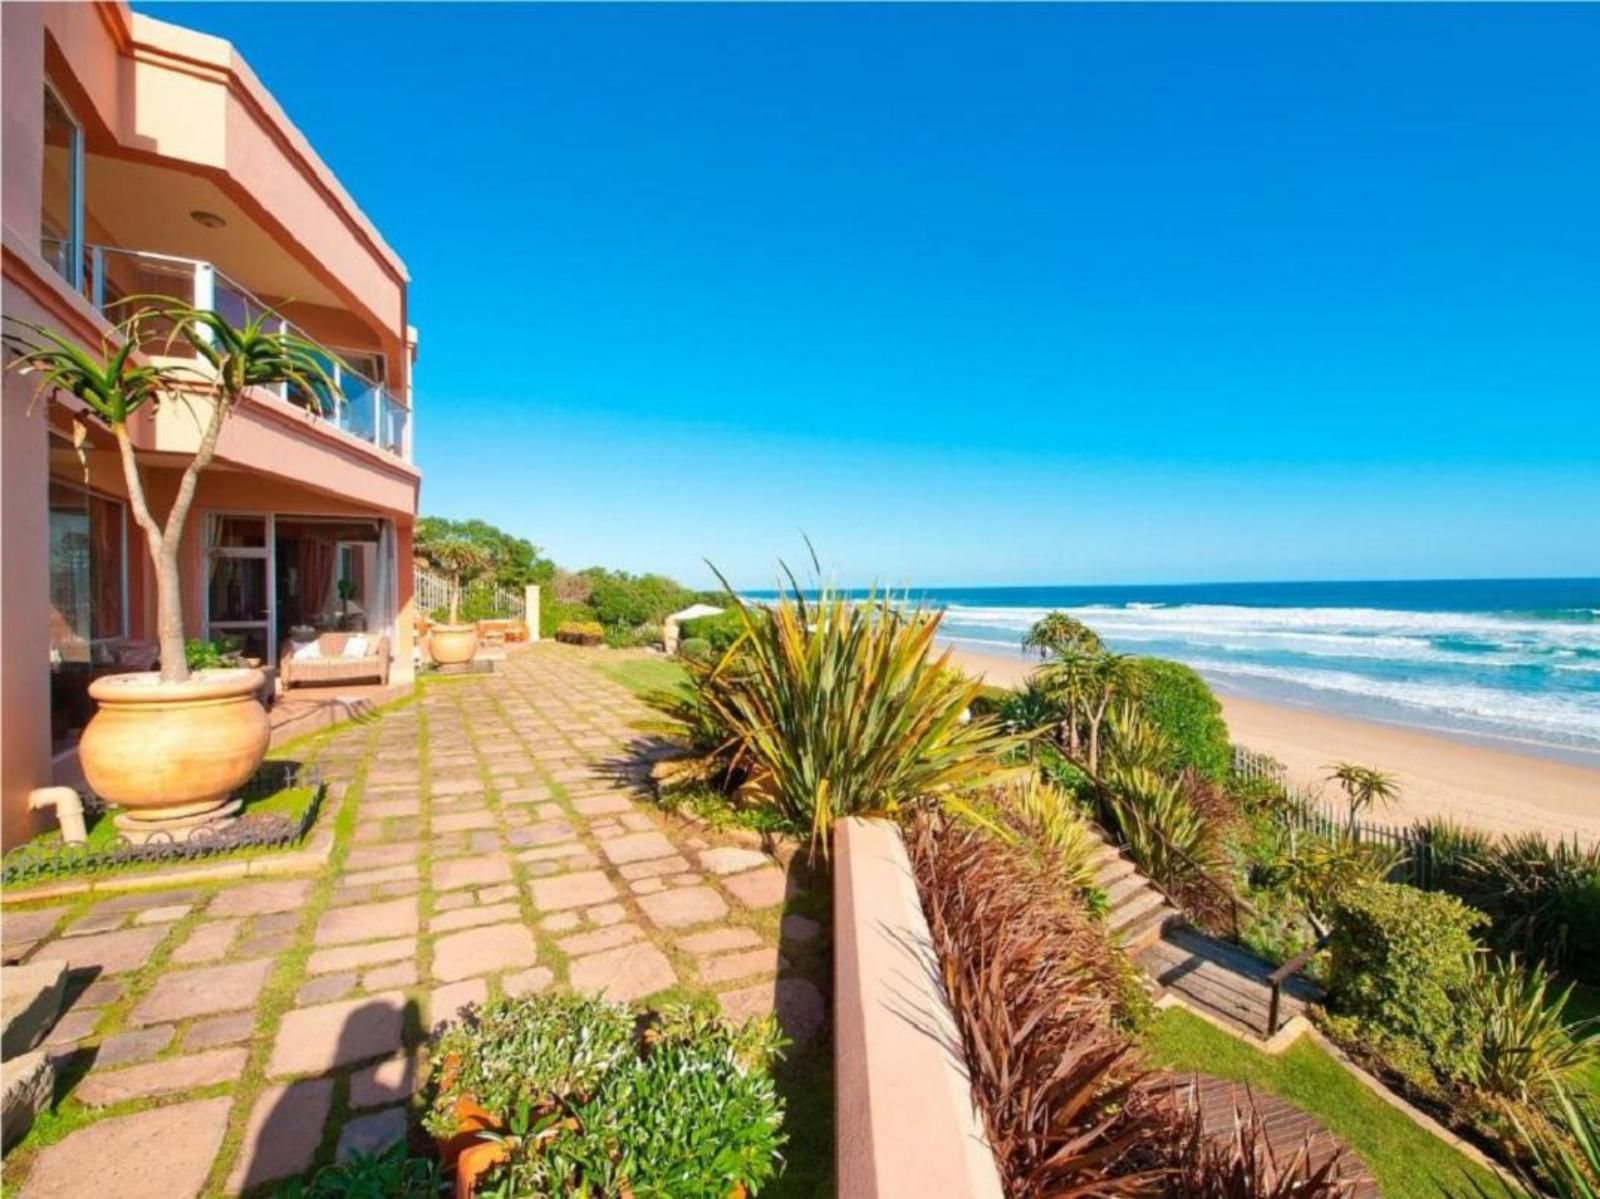 Xanadu Guest Villa Wilderness Western Cape South Africa Complementary Colors, Colorful, Beach, Nature, Sand, Palm Tree, Plant, Wood, Garden